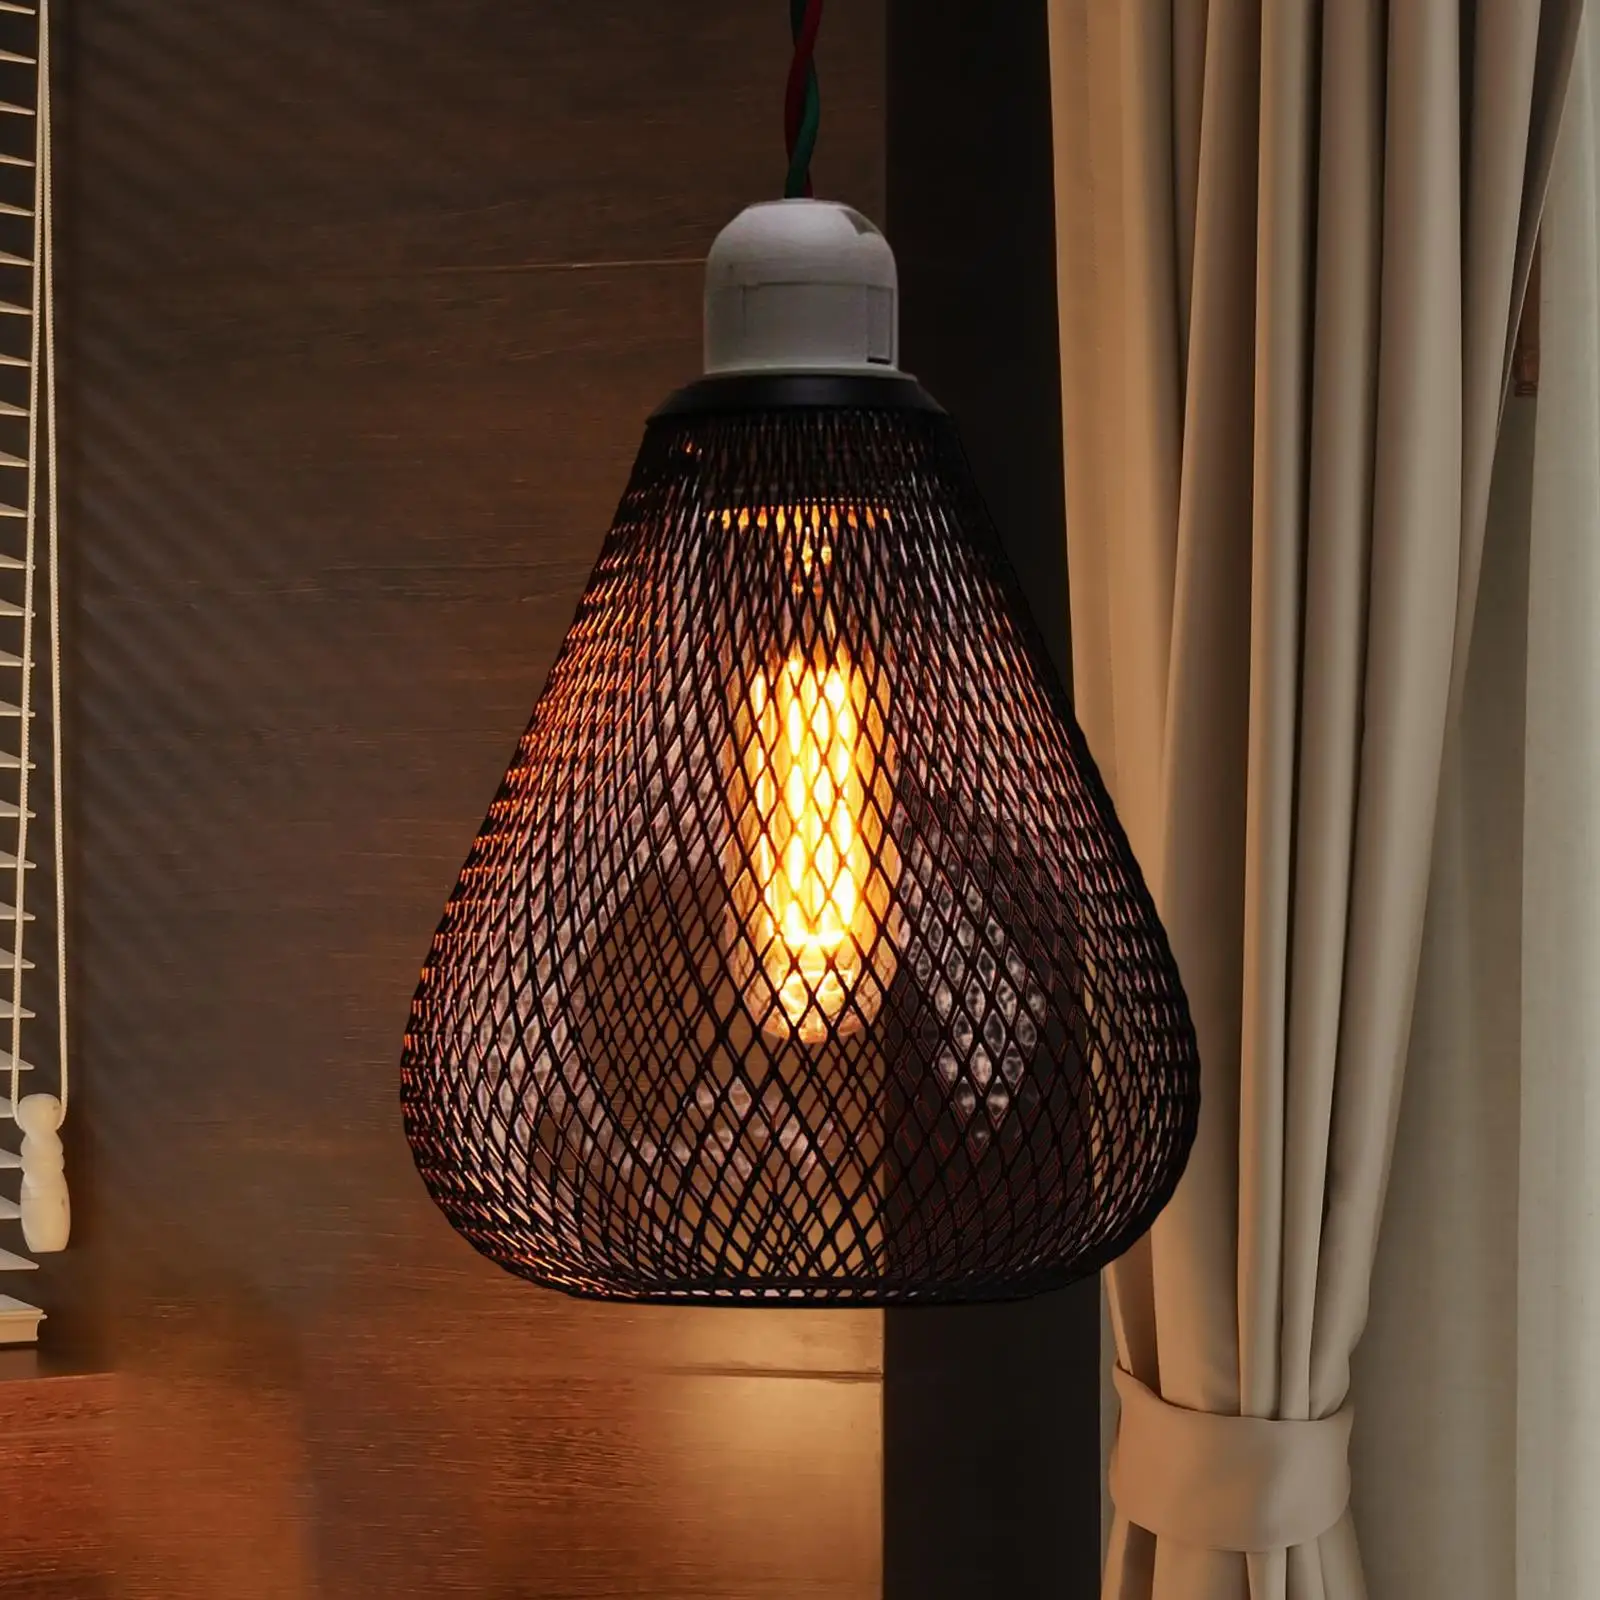 Iron Wire Lampshade Retro Style Ceiling Pendant Light Shade Hollow Lampshade for